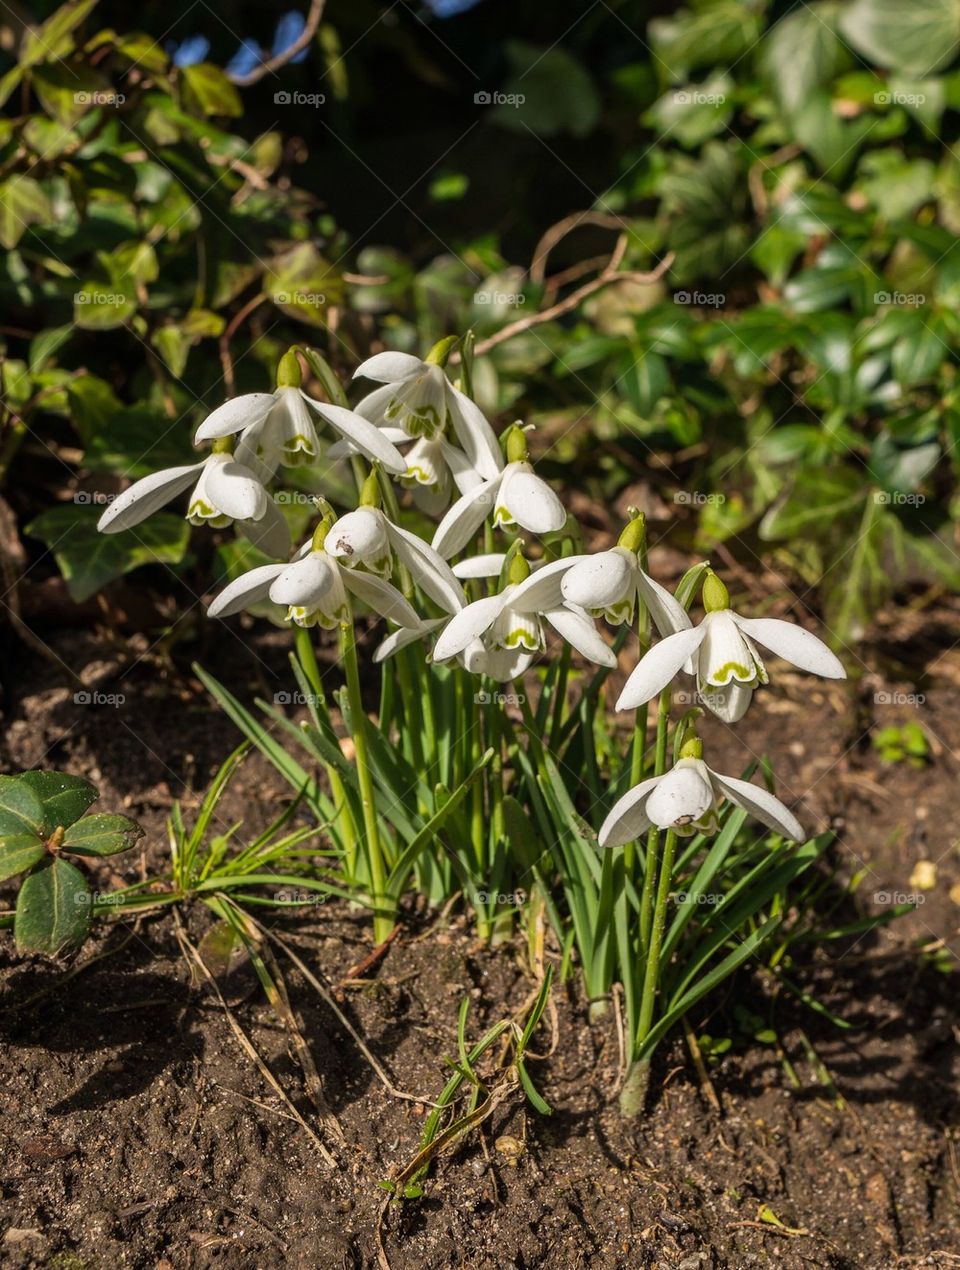 Galanthus flower blooming outdoors